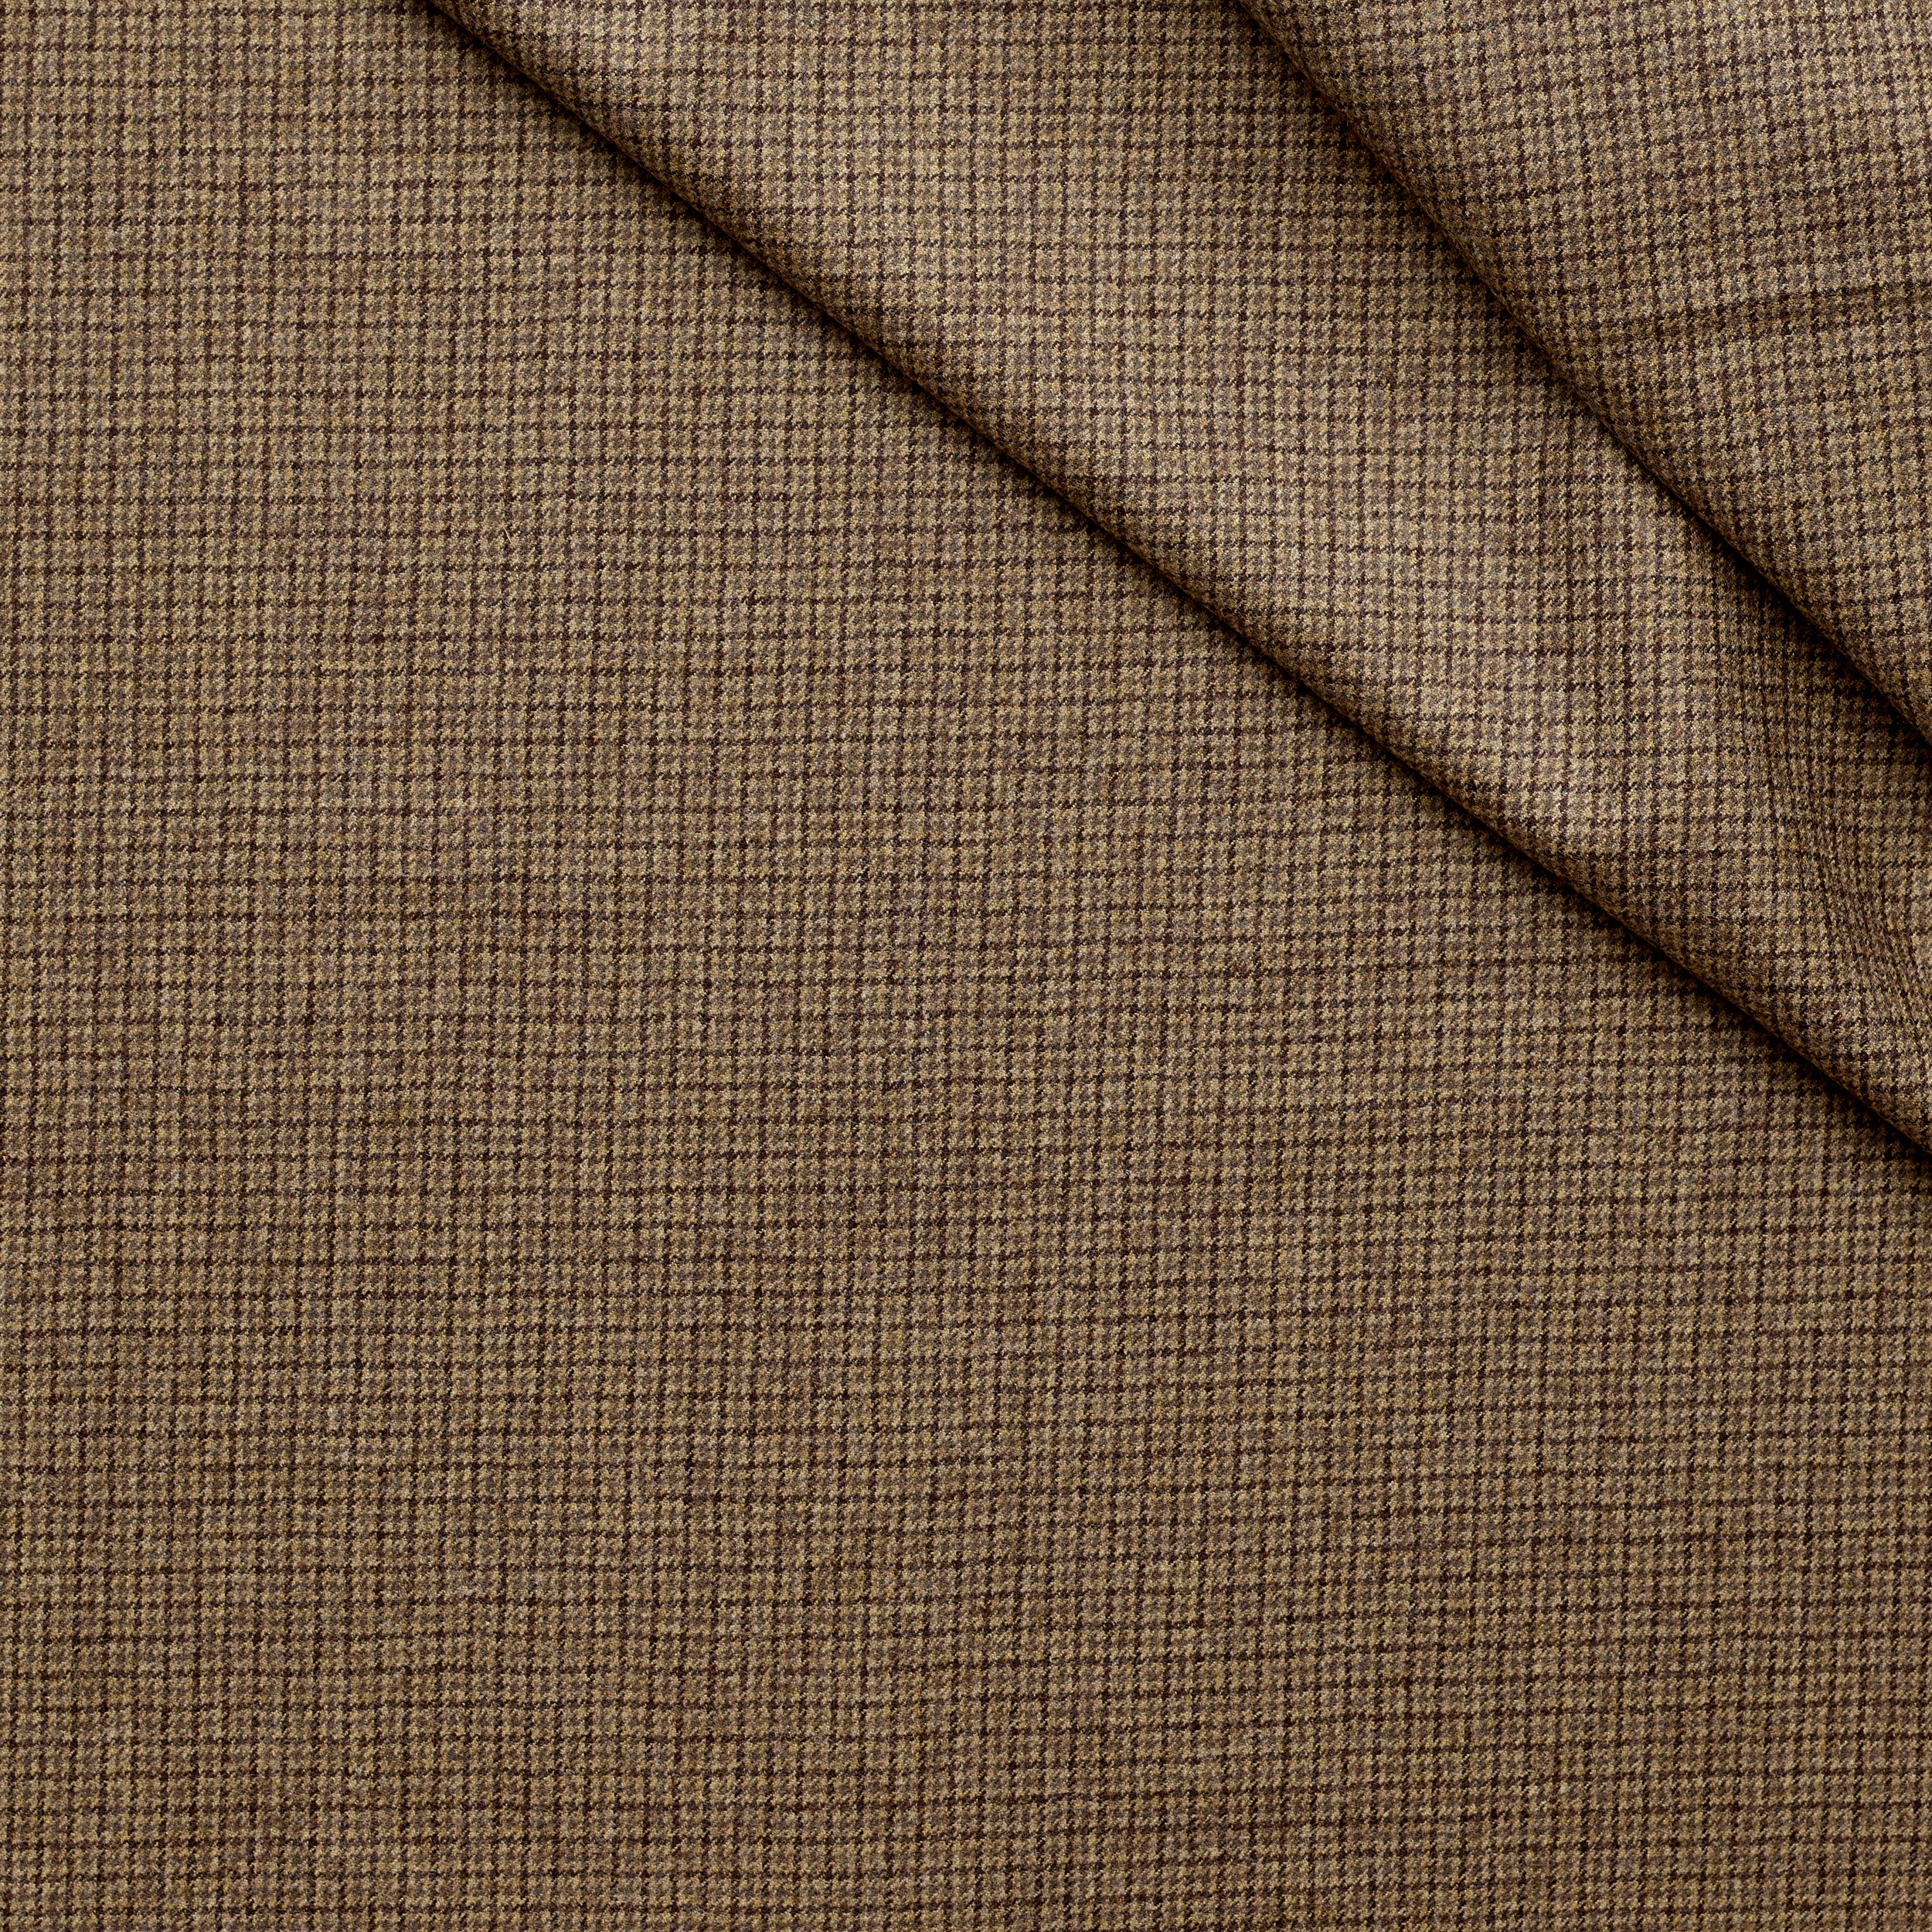 WF2-15 : Worsted Flannel Light Brown Triple Houndstooth